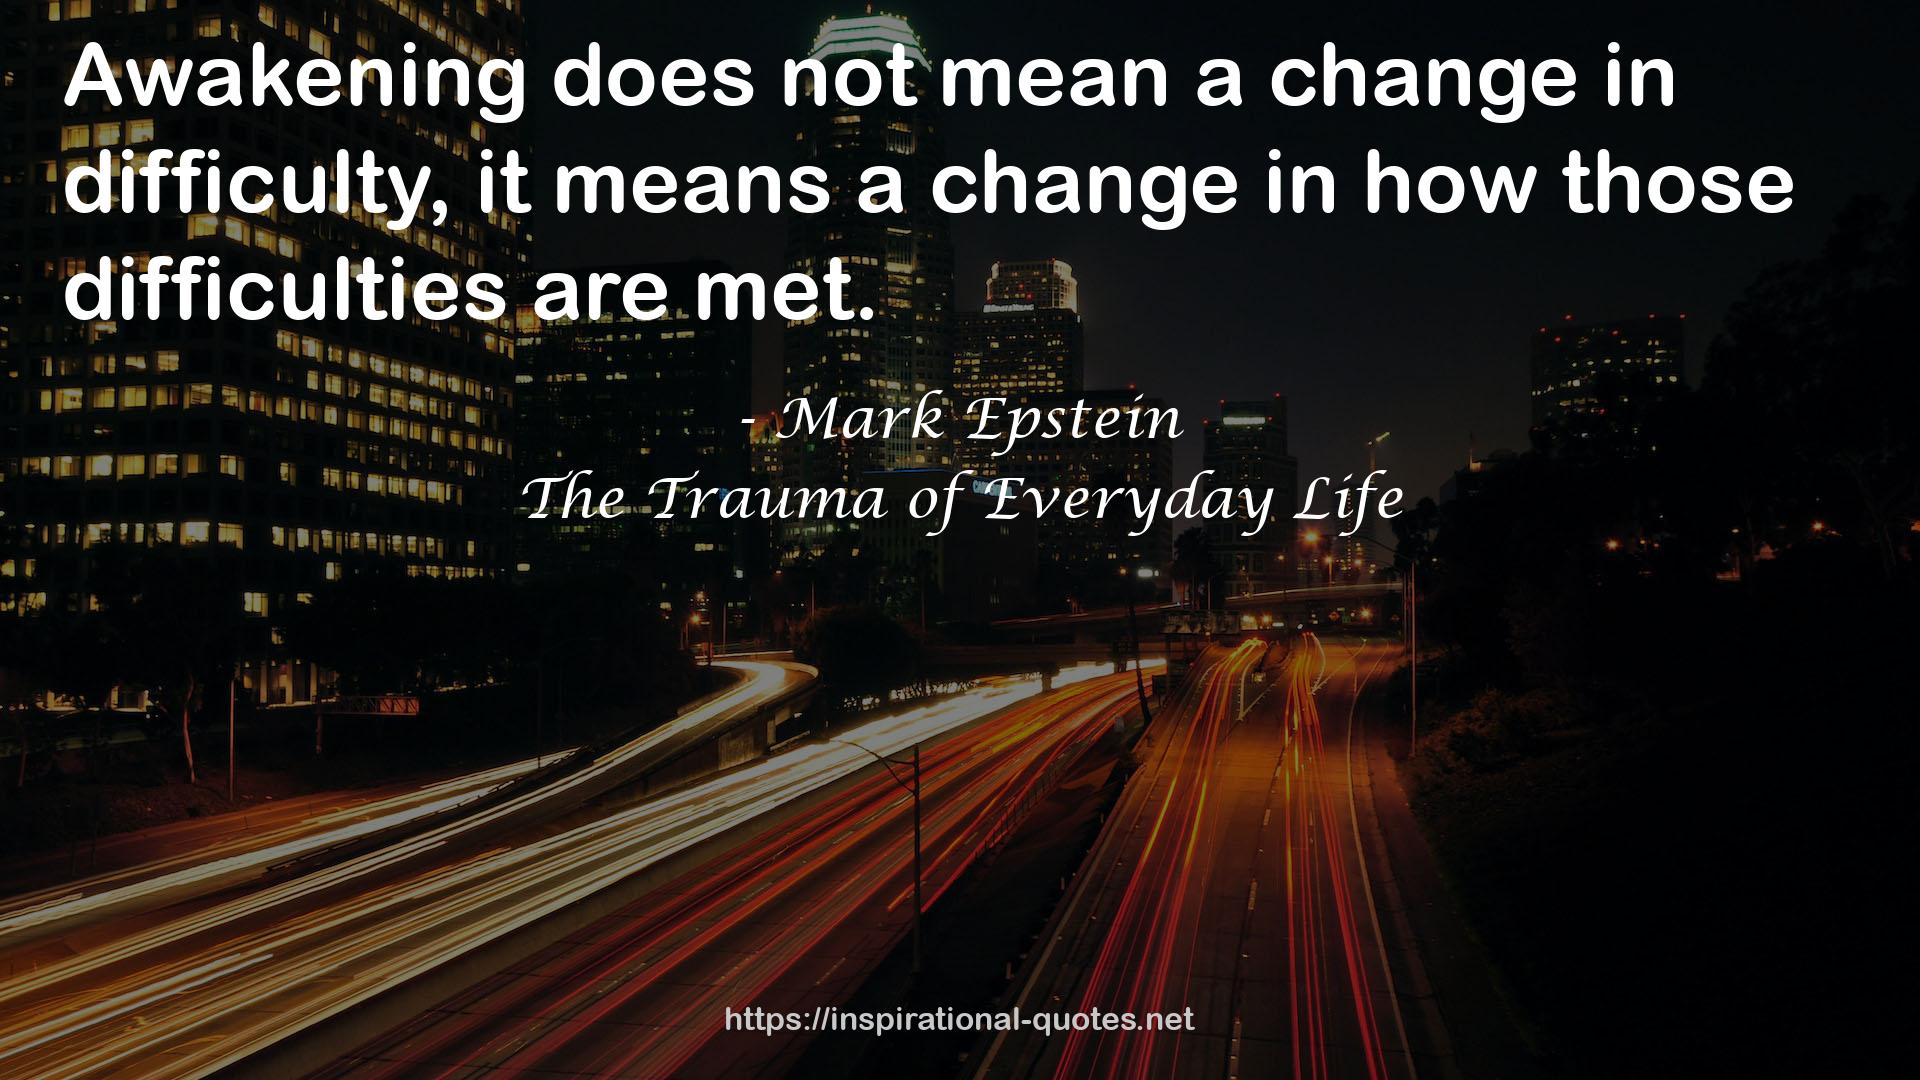 The Trauma of Everyday Life QUOTES